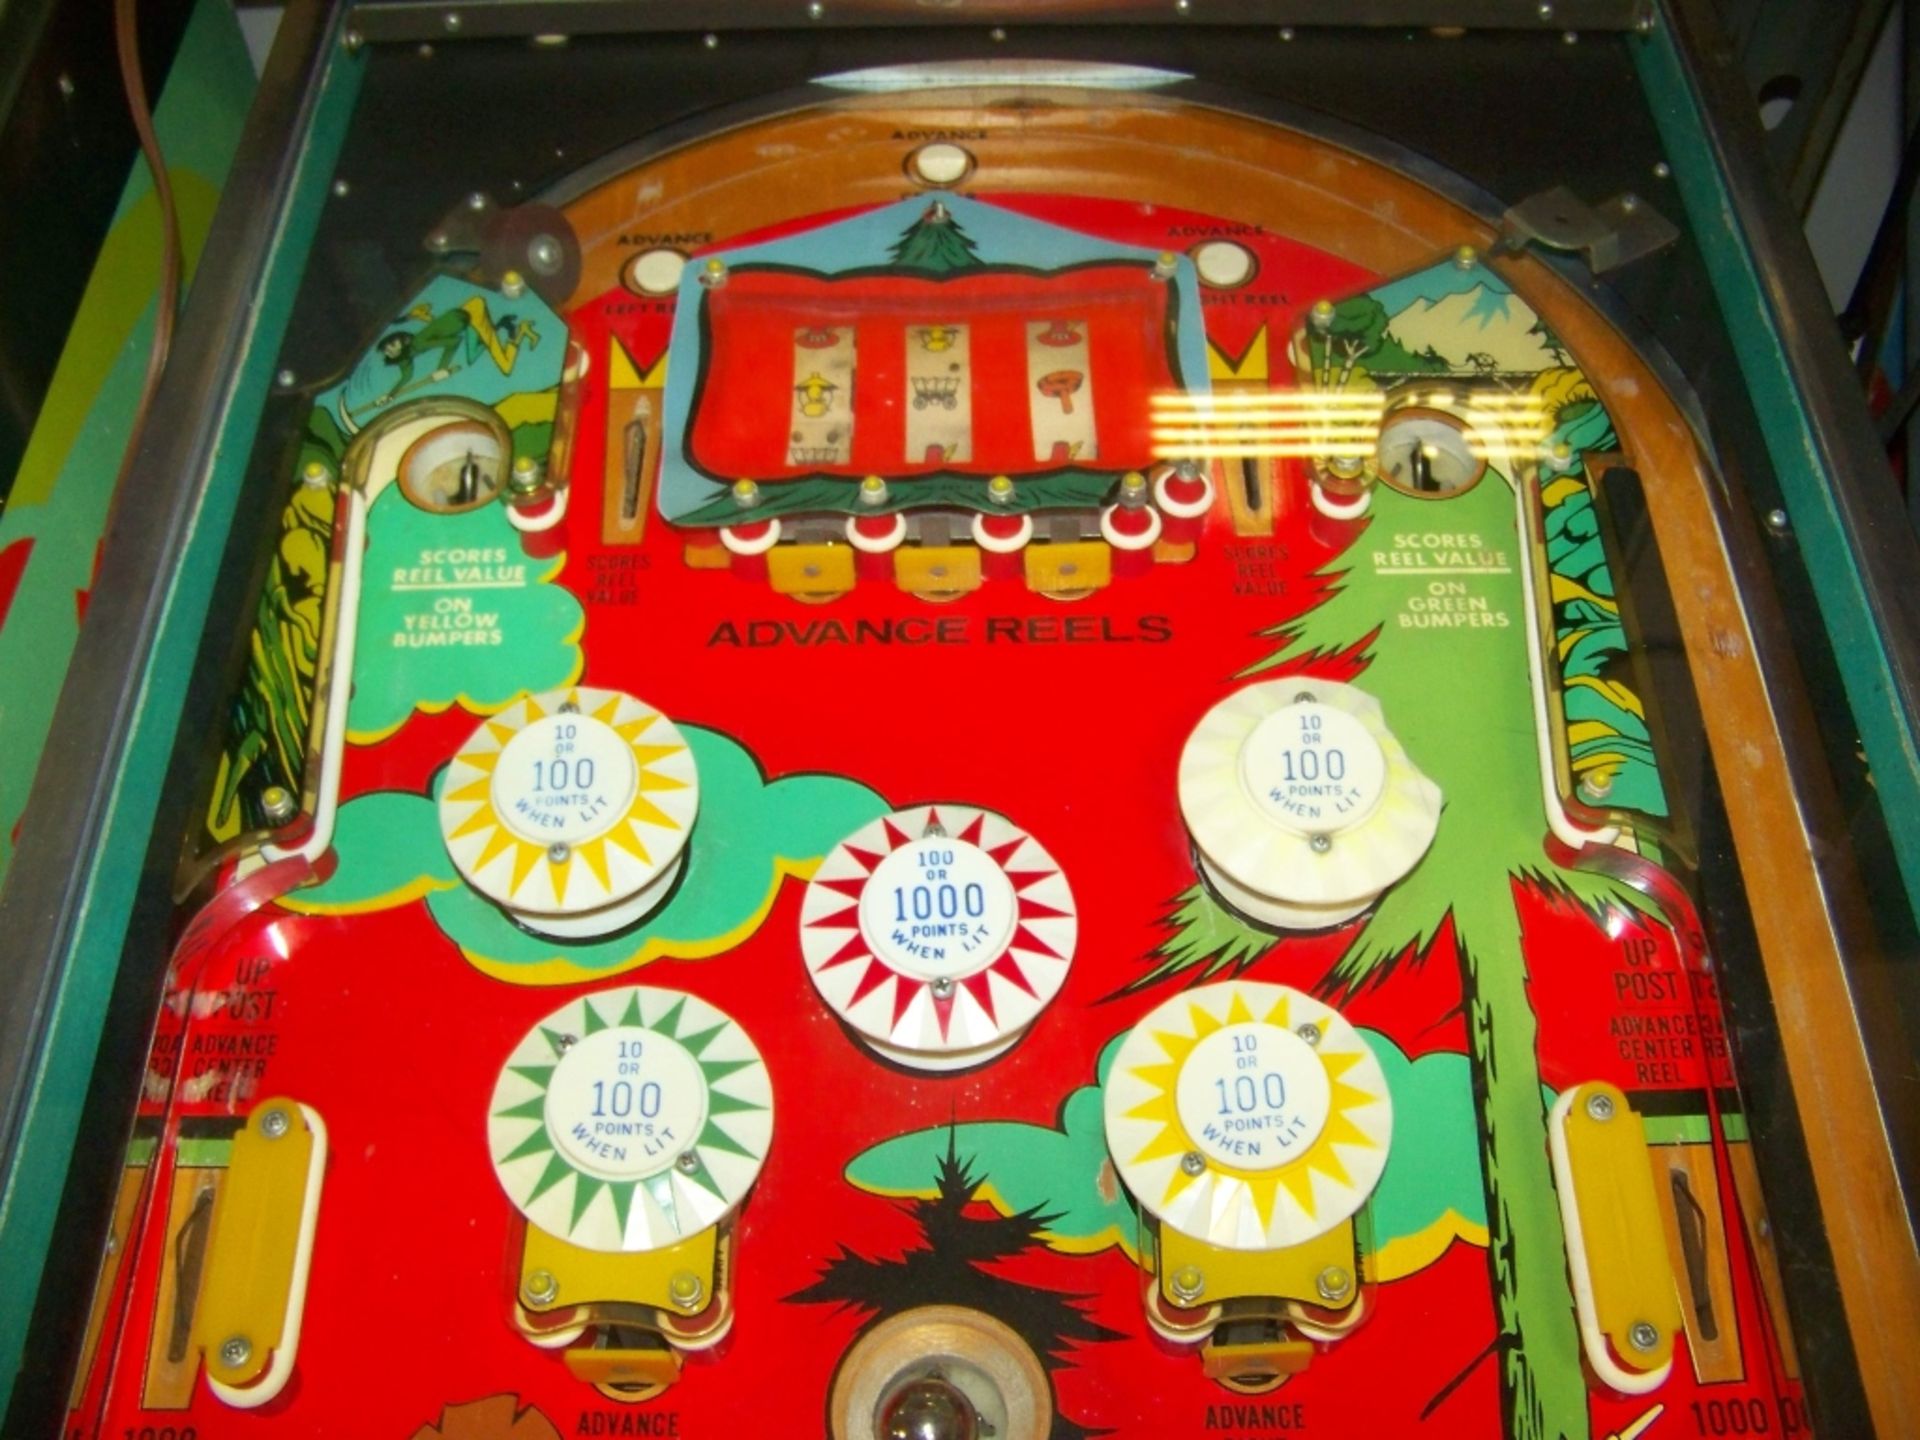 KLONDIKE PINBALL MACHINE WILLIAMS 1971 Item is in used condition. Evidence of wear and commercial - Image 5 of 5